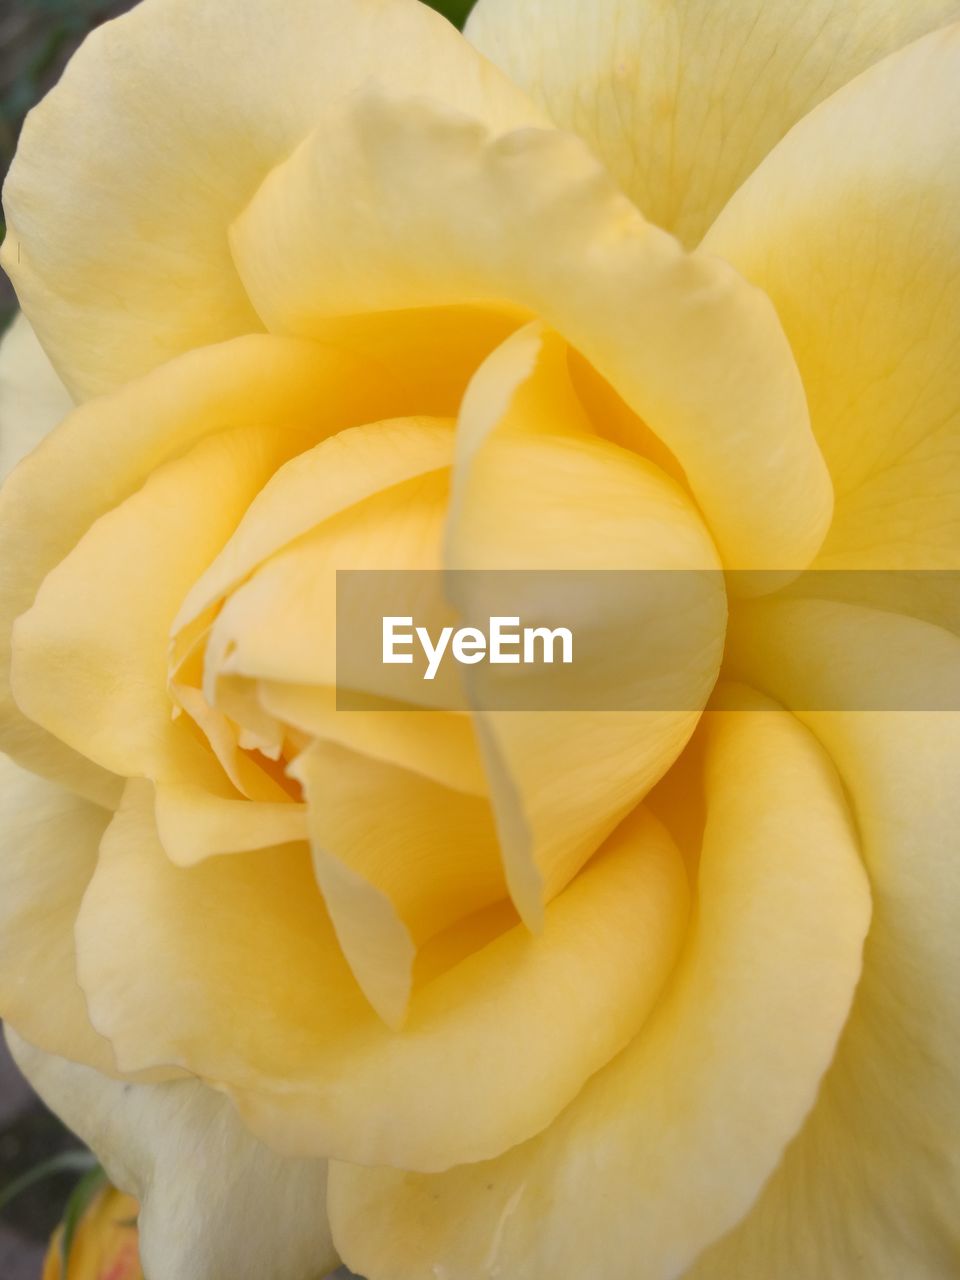 EXTREME CLOSE-UP OF YELLOW FLOWER